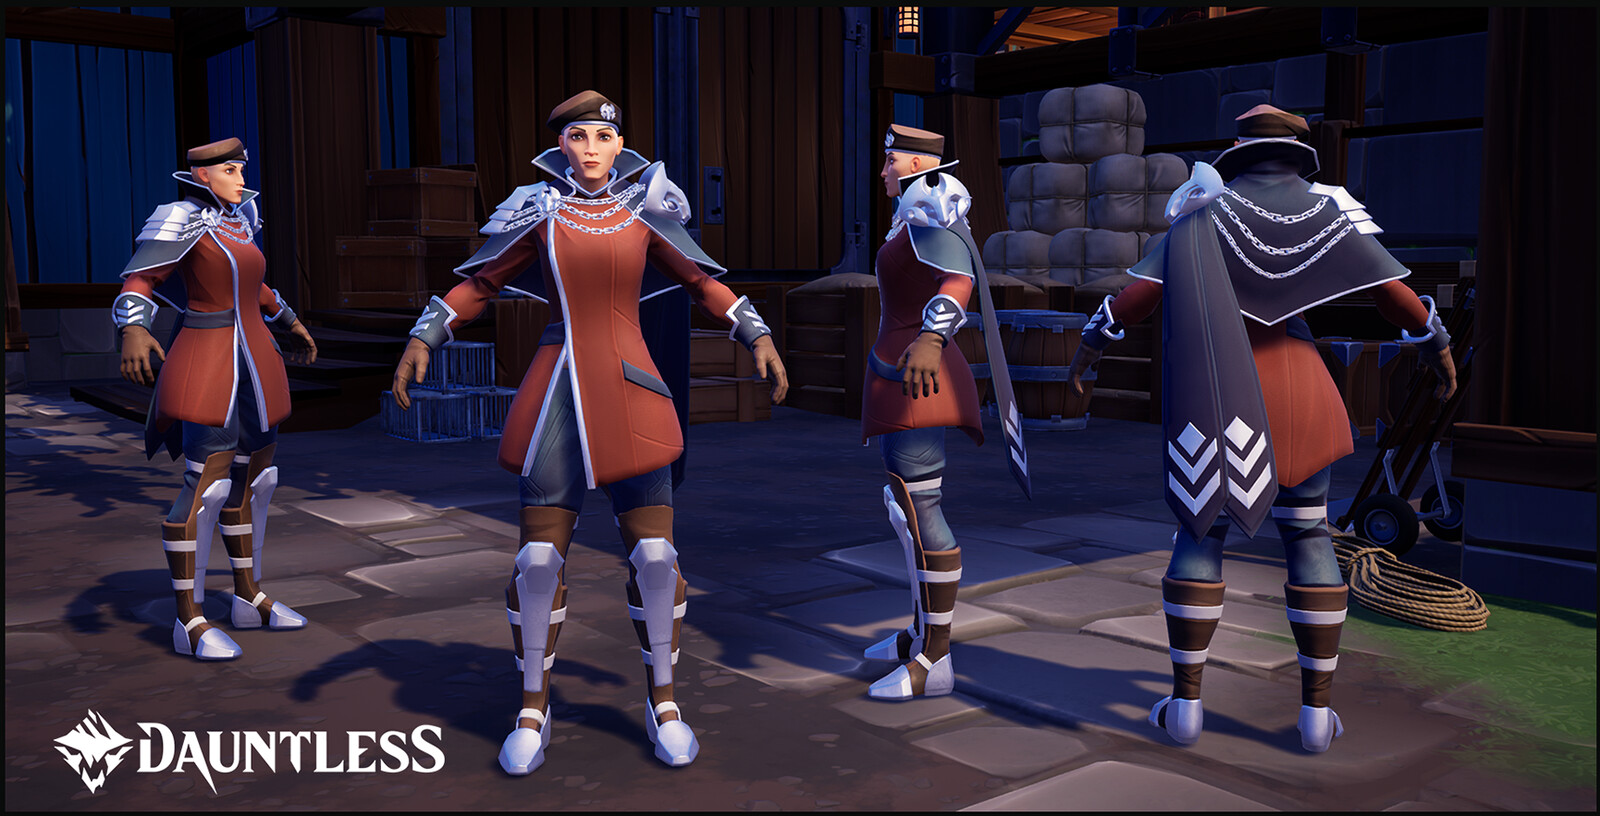 Guard Commander's Outfit. Cosmetic skin sold on the MTX store (female version shown).